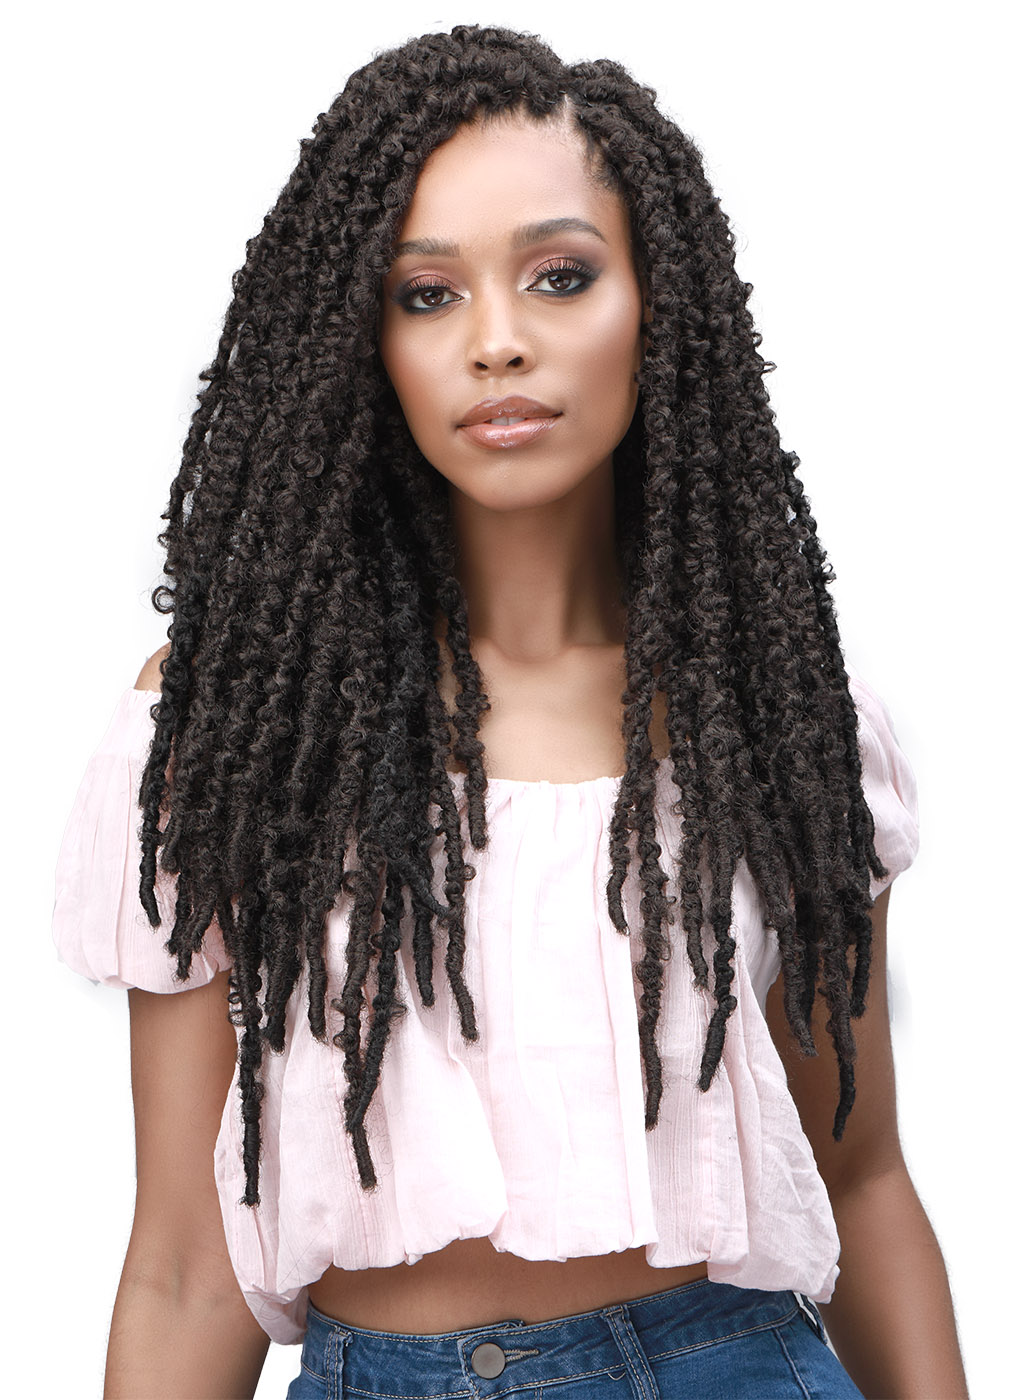 Download Natural Hair Extensions Human Hair Wigs Kinky Twist Weaving Supplies Indian Remy Hair Real Hair Extensions Hisandher Com